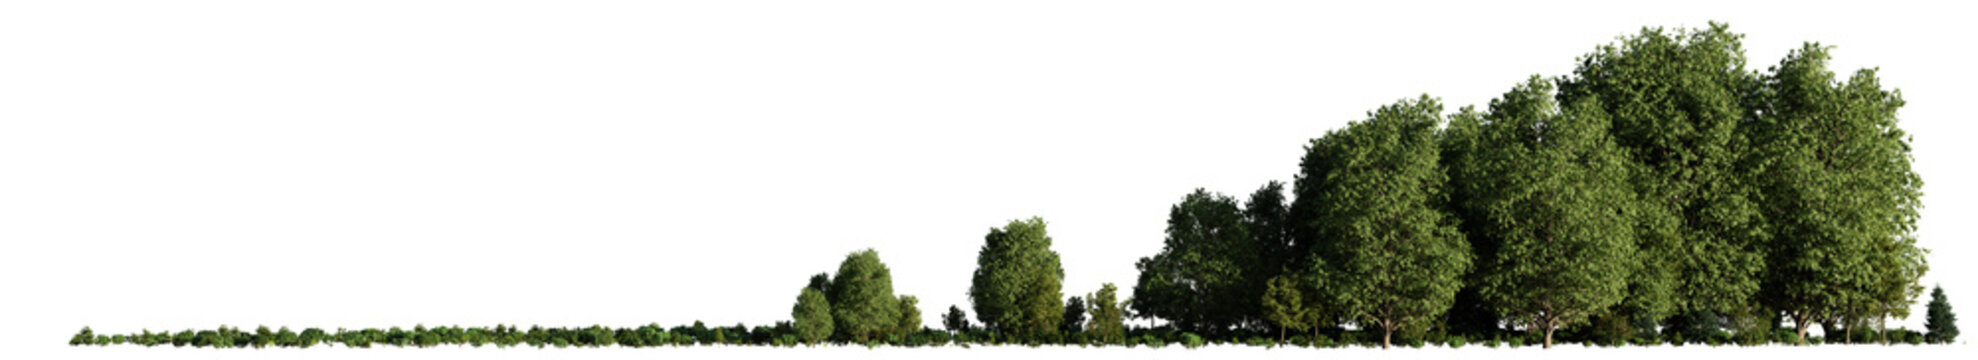 small grove, trees and bushes in an open forest landscape, isolated on transparent background banner © dottedyeti